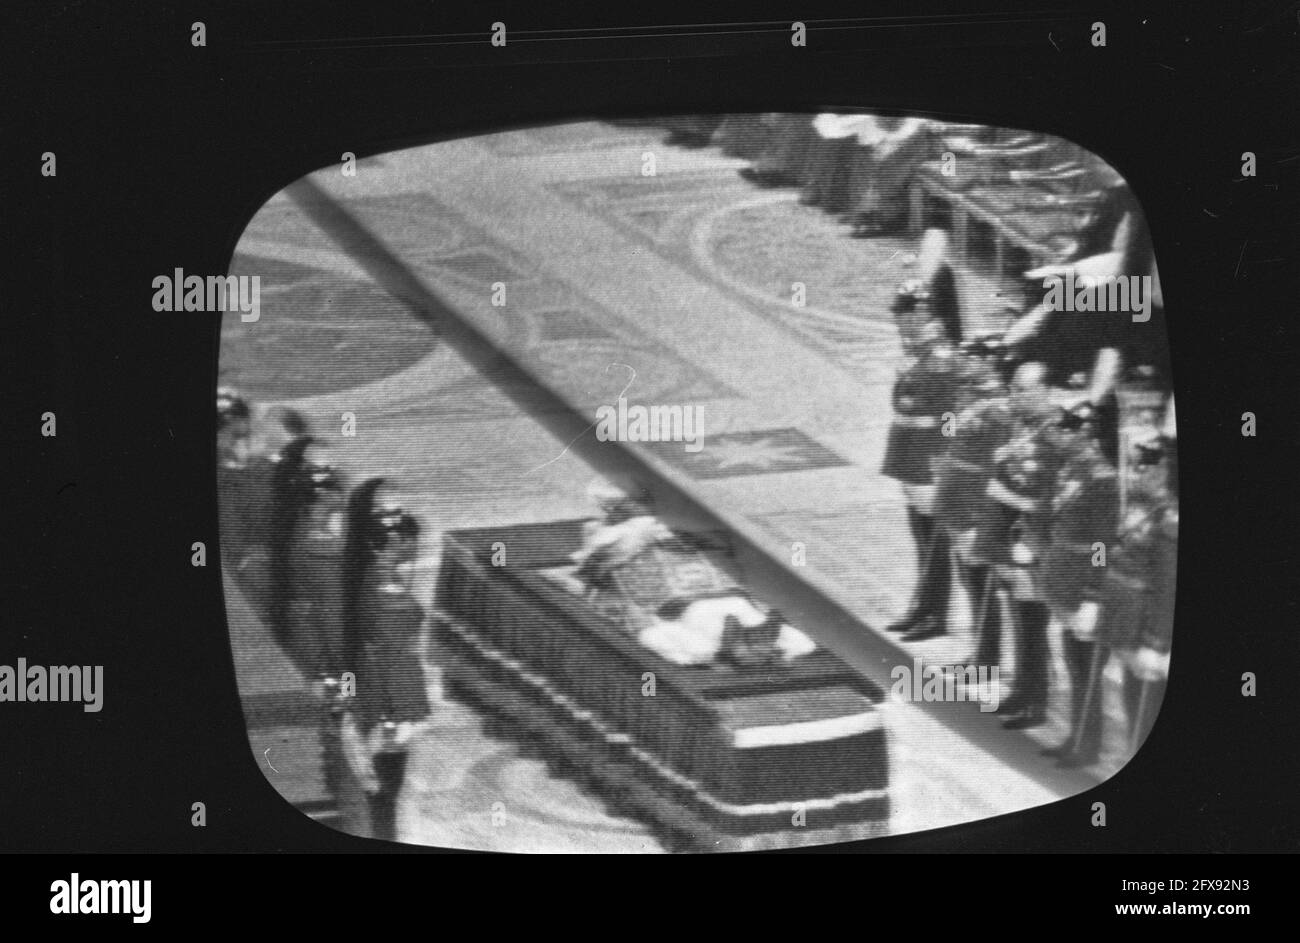 Entombment of mortal remains of Pope John XXIII in St. Peter's, Rome. Covering the coffin, June 6, 1963, coffins, The Netherlands, 20th century press agency photo, news to remember, documentary, historic photography 1945-1990, visual stories, human history of the Twentieth Century, capturing moments in time Stock Photo